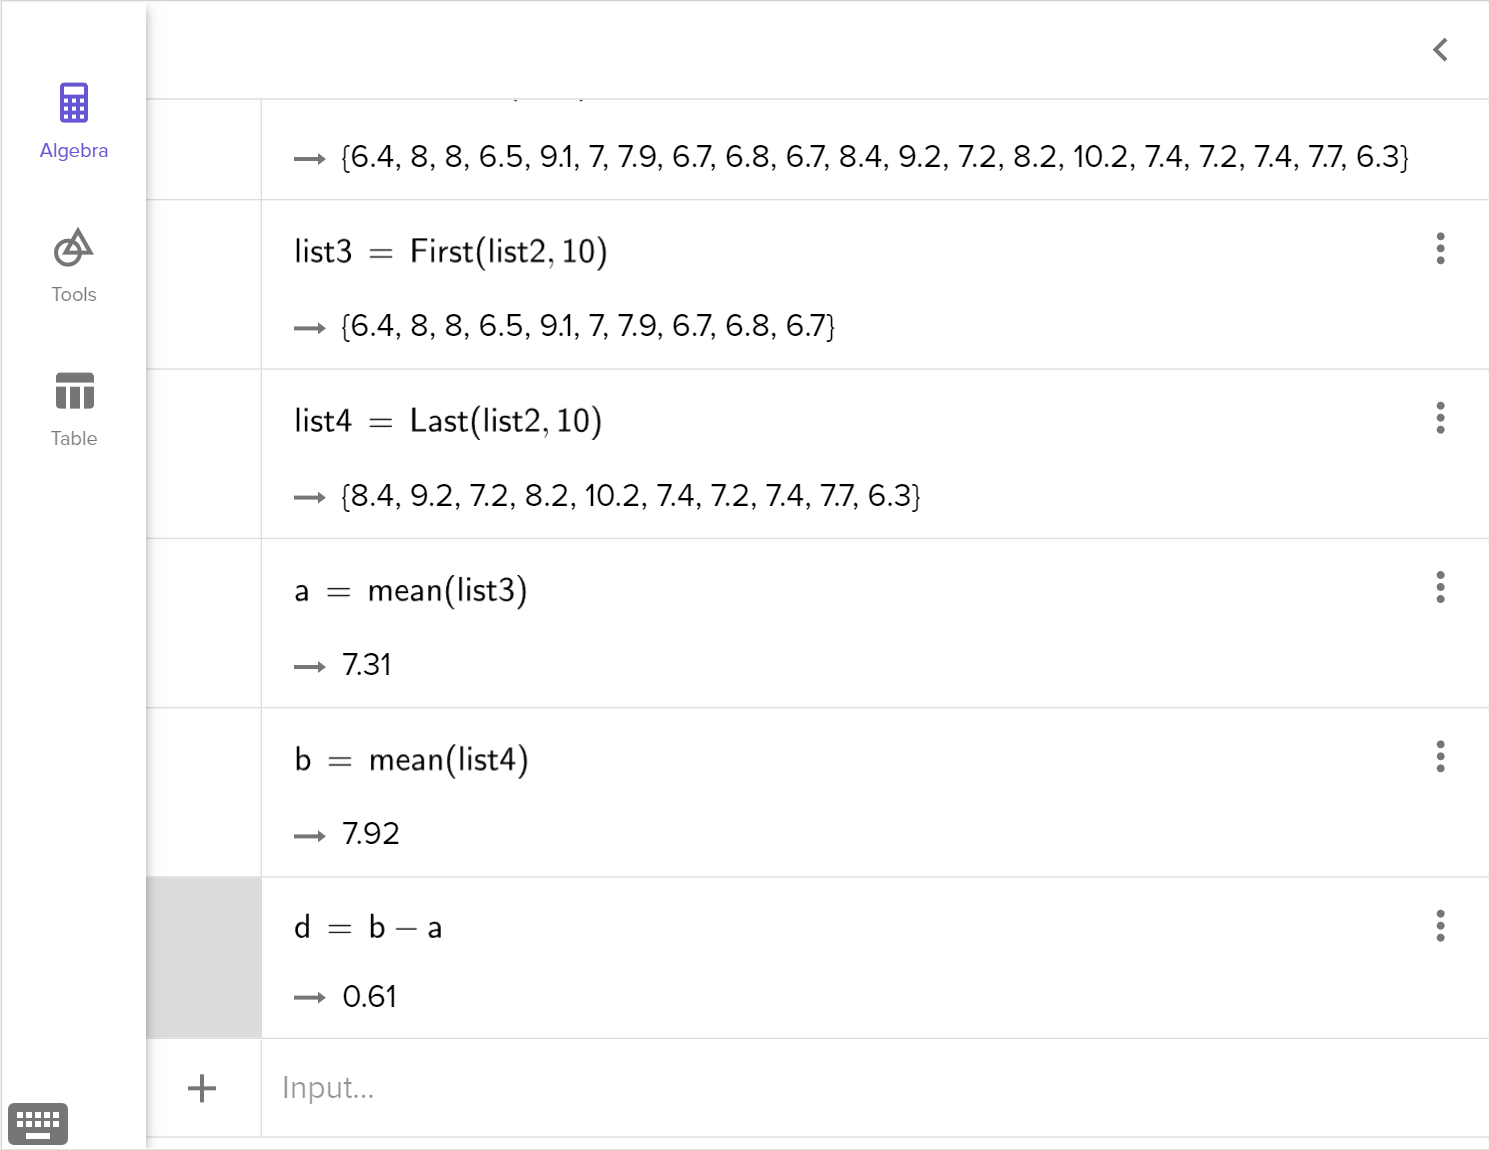 A screenshot of the GeoGebra graphing calculator showing how to find the means of 2 new lists and the difference of their means. Speak to your teacher for more details.